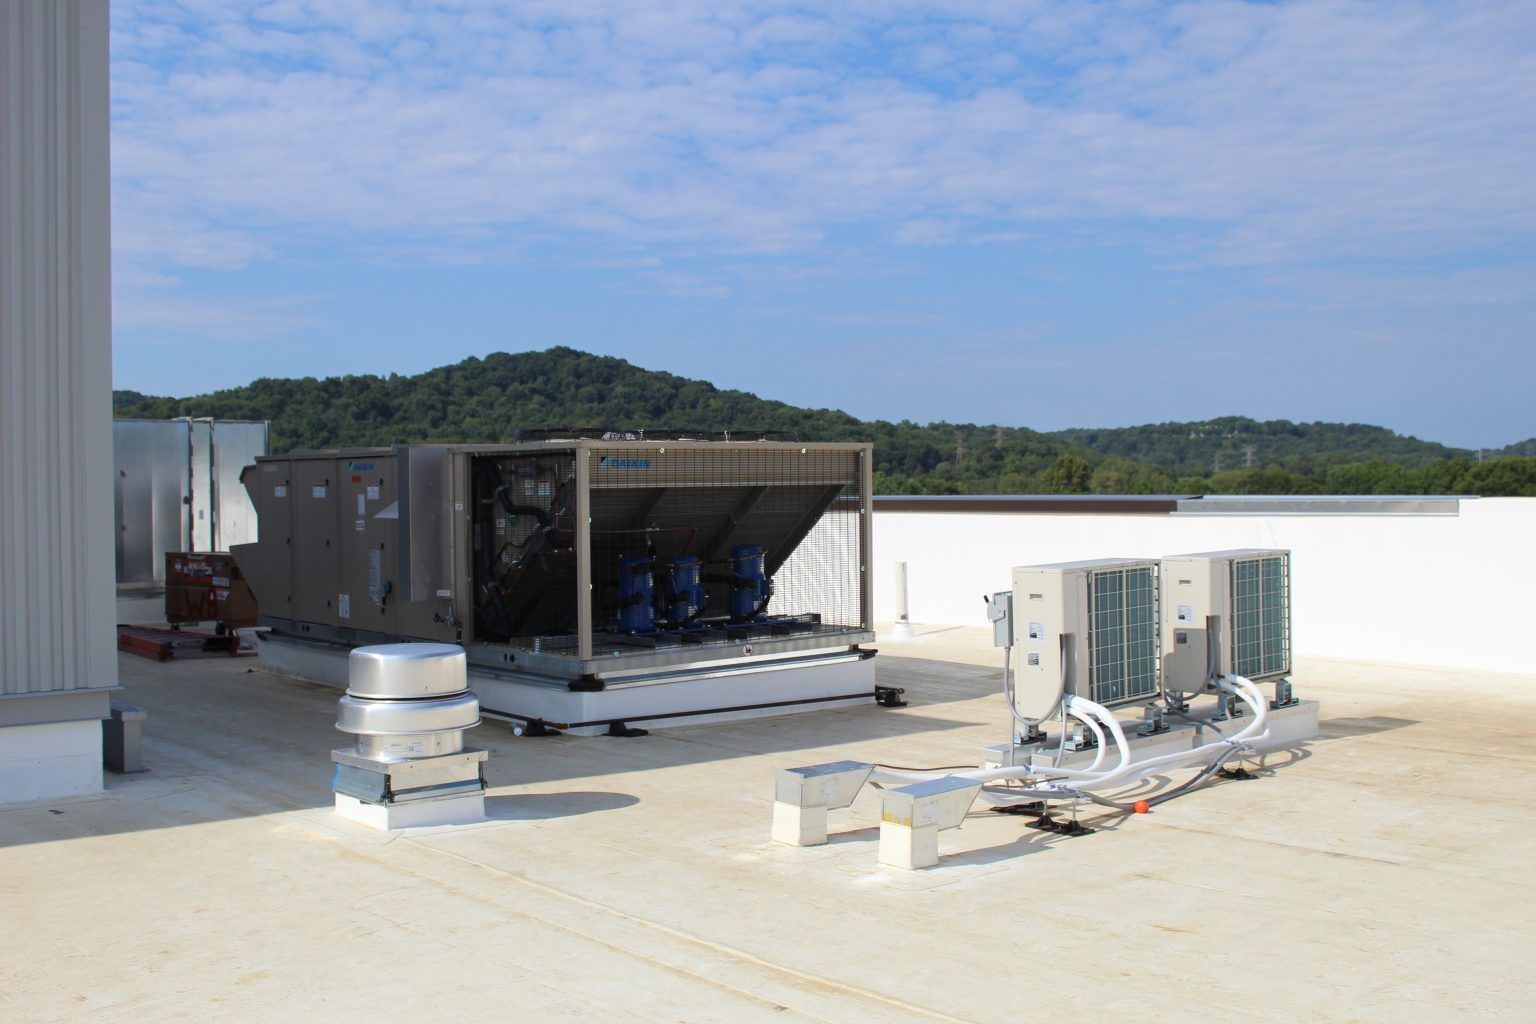 Air Conditioner On Roof - Nashville, TN - Total Group LLC